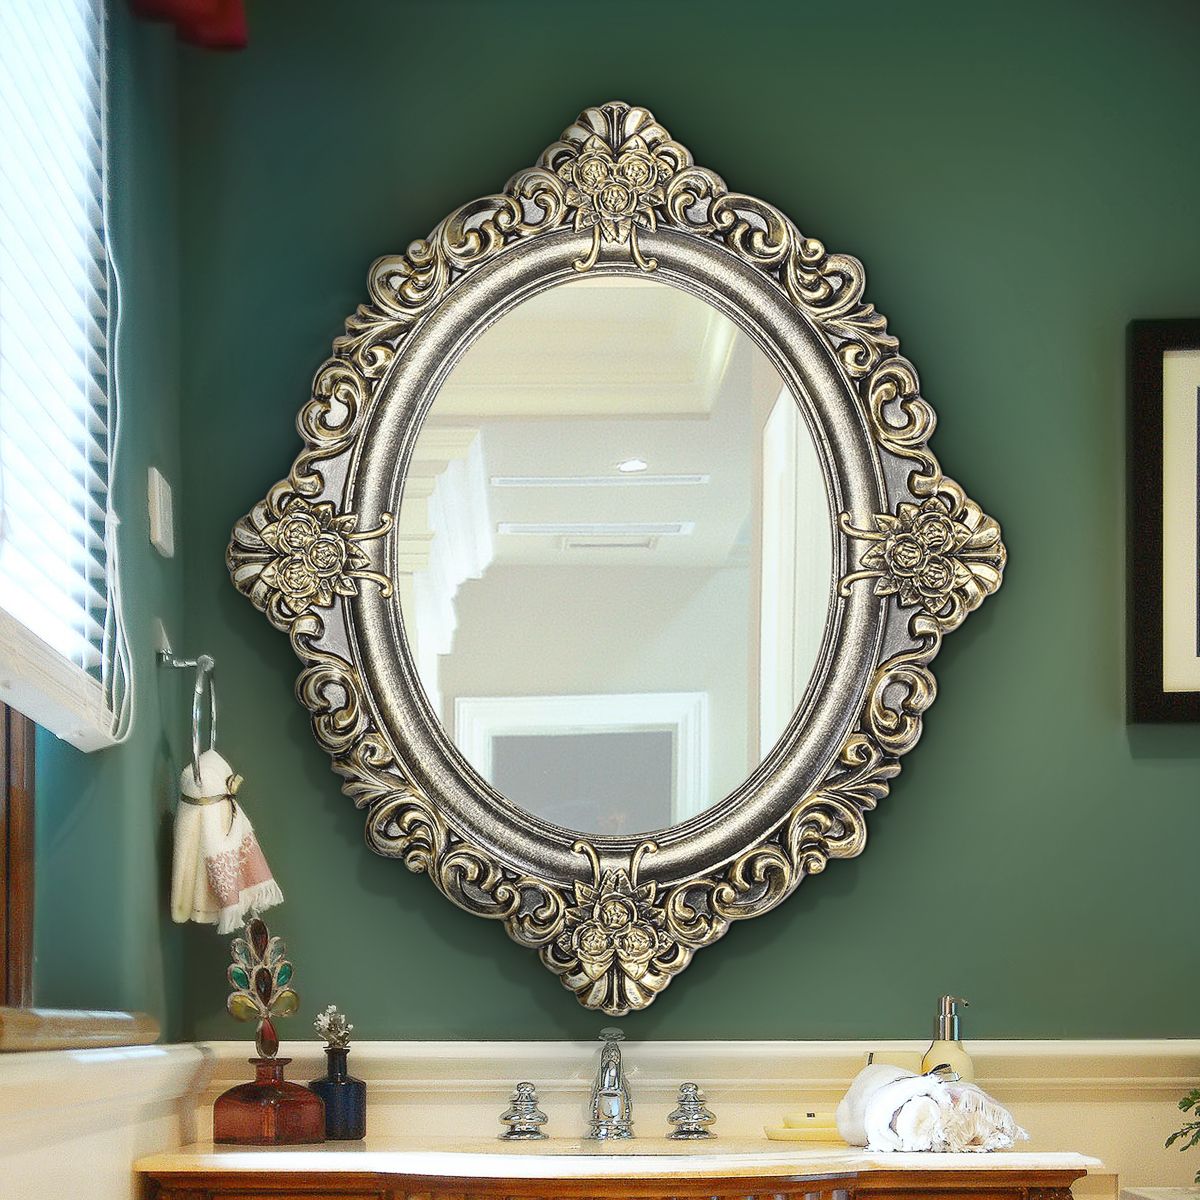 23 Inch Oval Decorative Mirrors Retro Vintage Wall Mouted Bronze Intended For Oval Metallic Accent Mirrors (View 4 of 15)